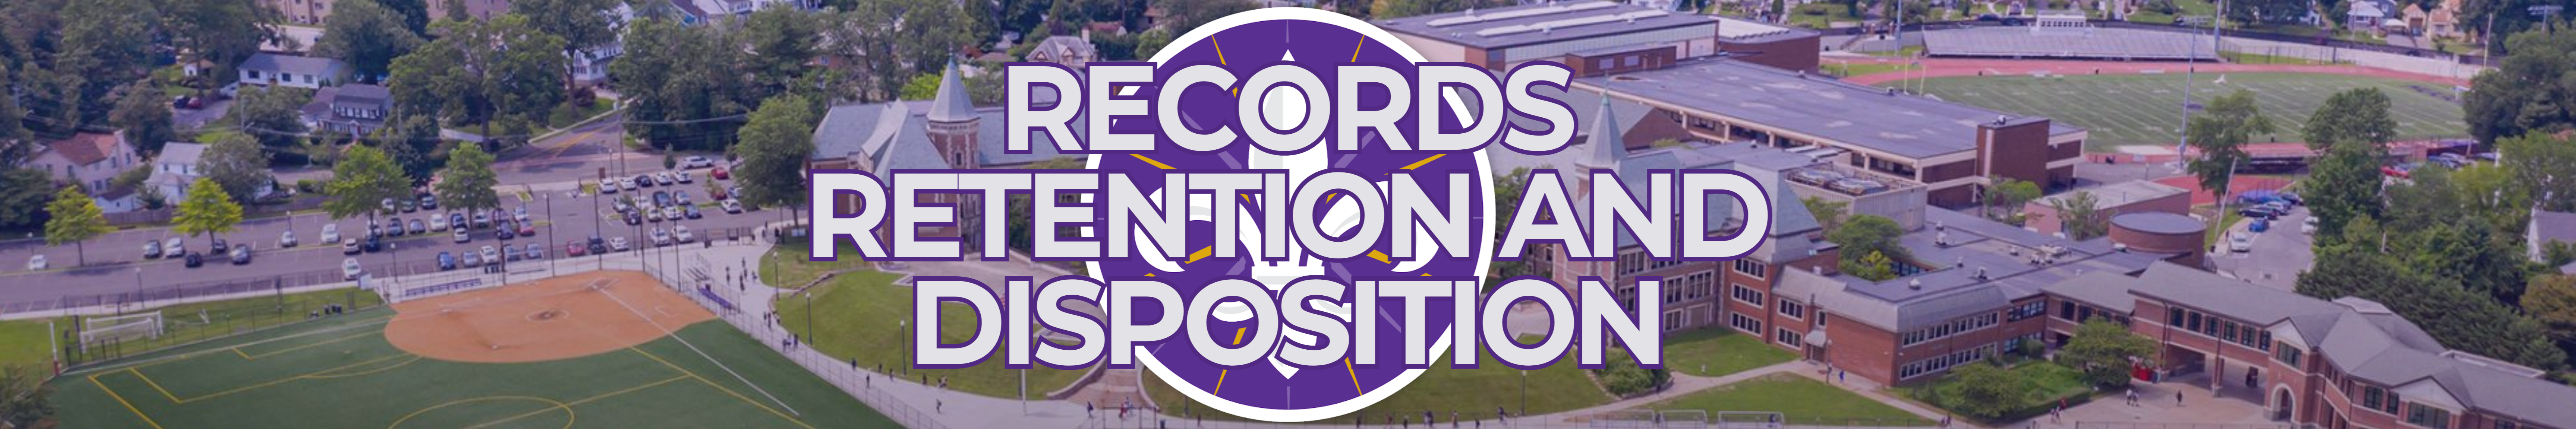 Records Retention and Disposition banner